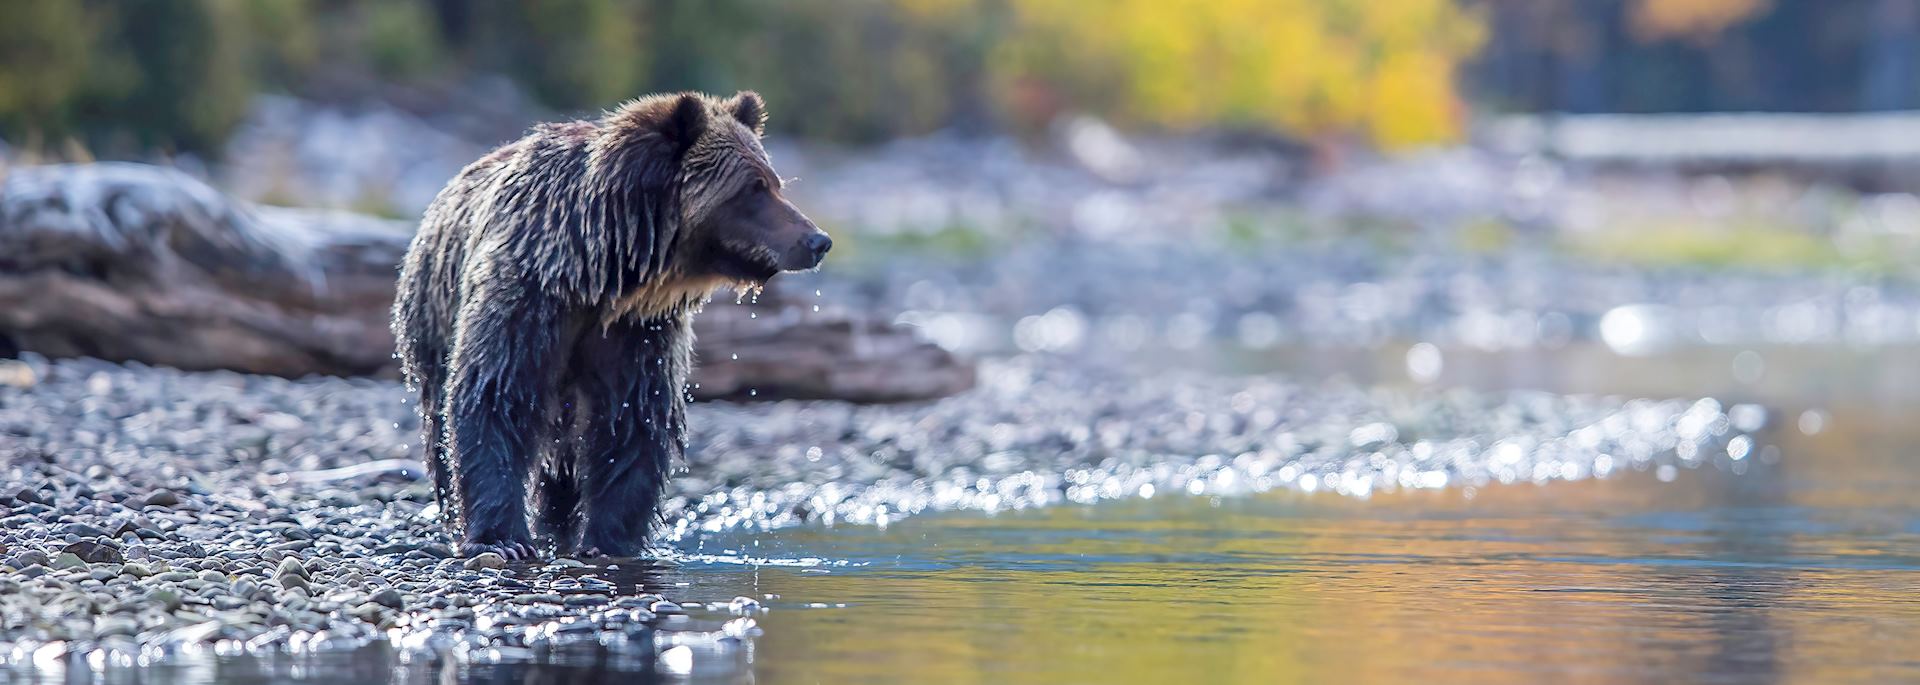 Grizzly bear, British Columbia